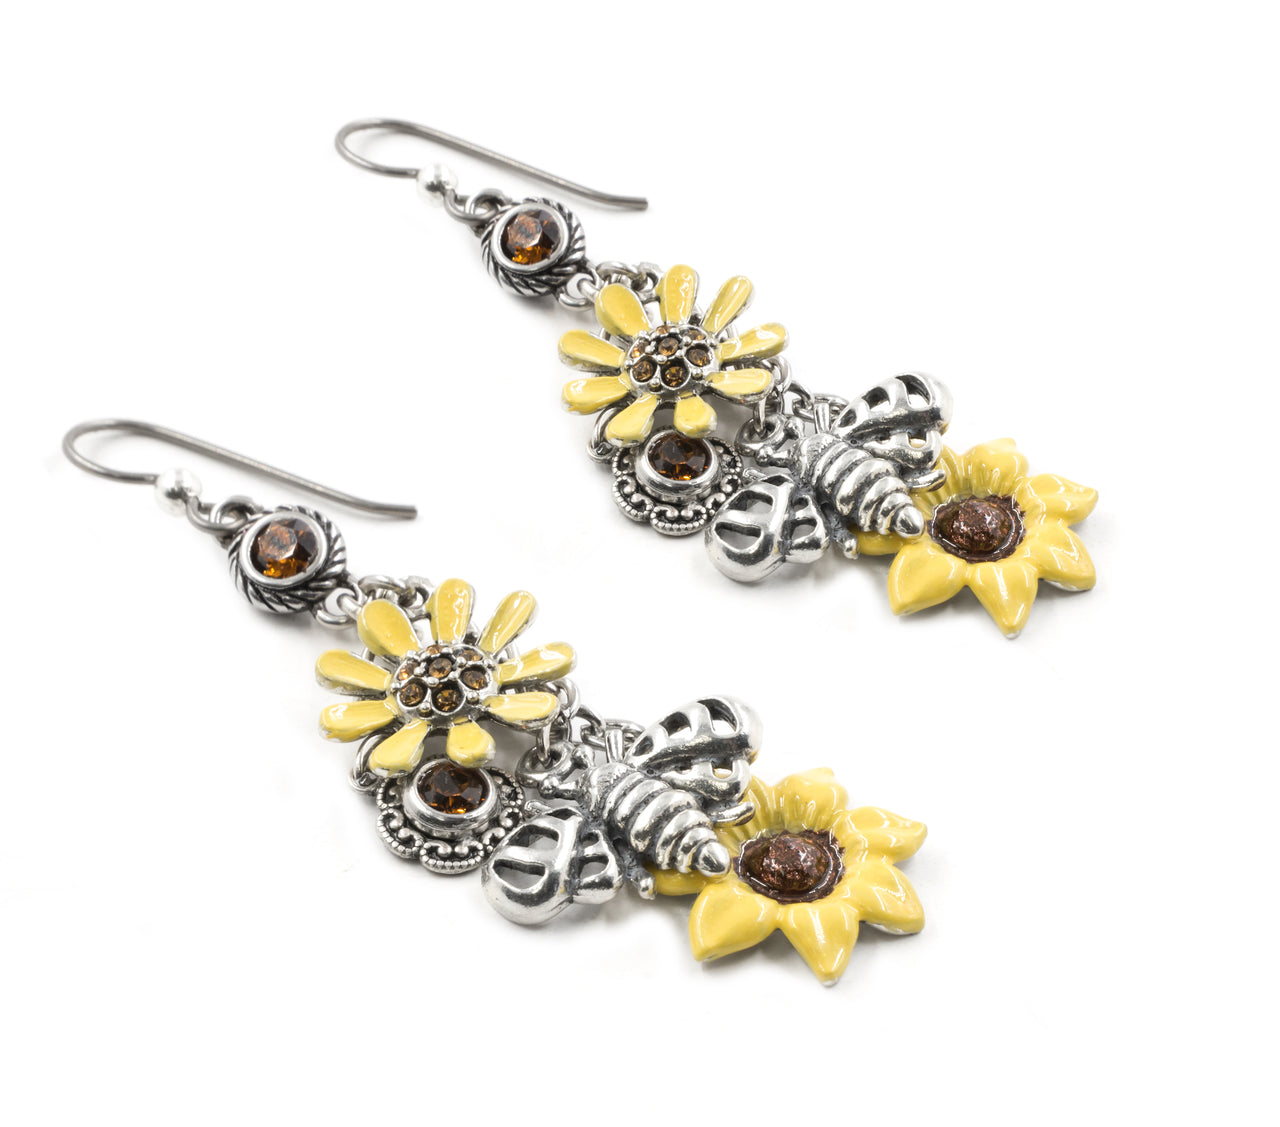 Sunflower Earrings with Chocolate Crystals